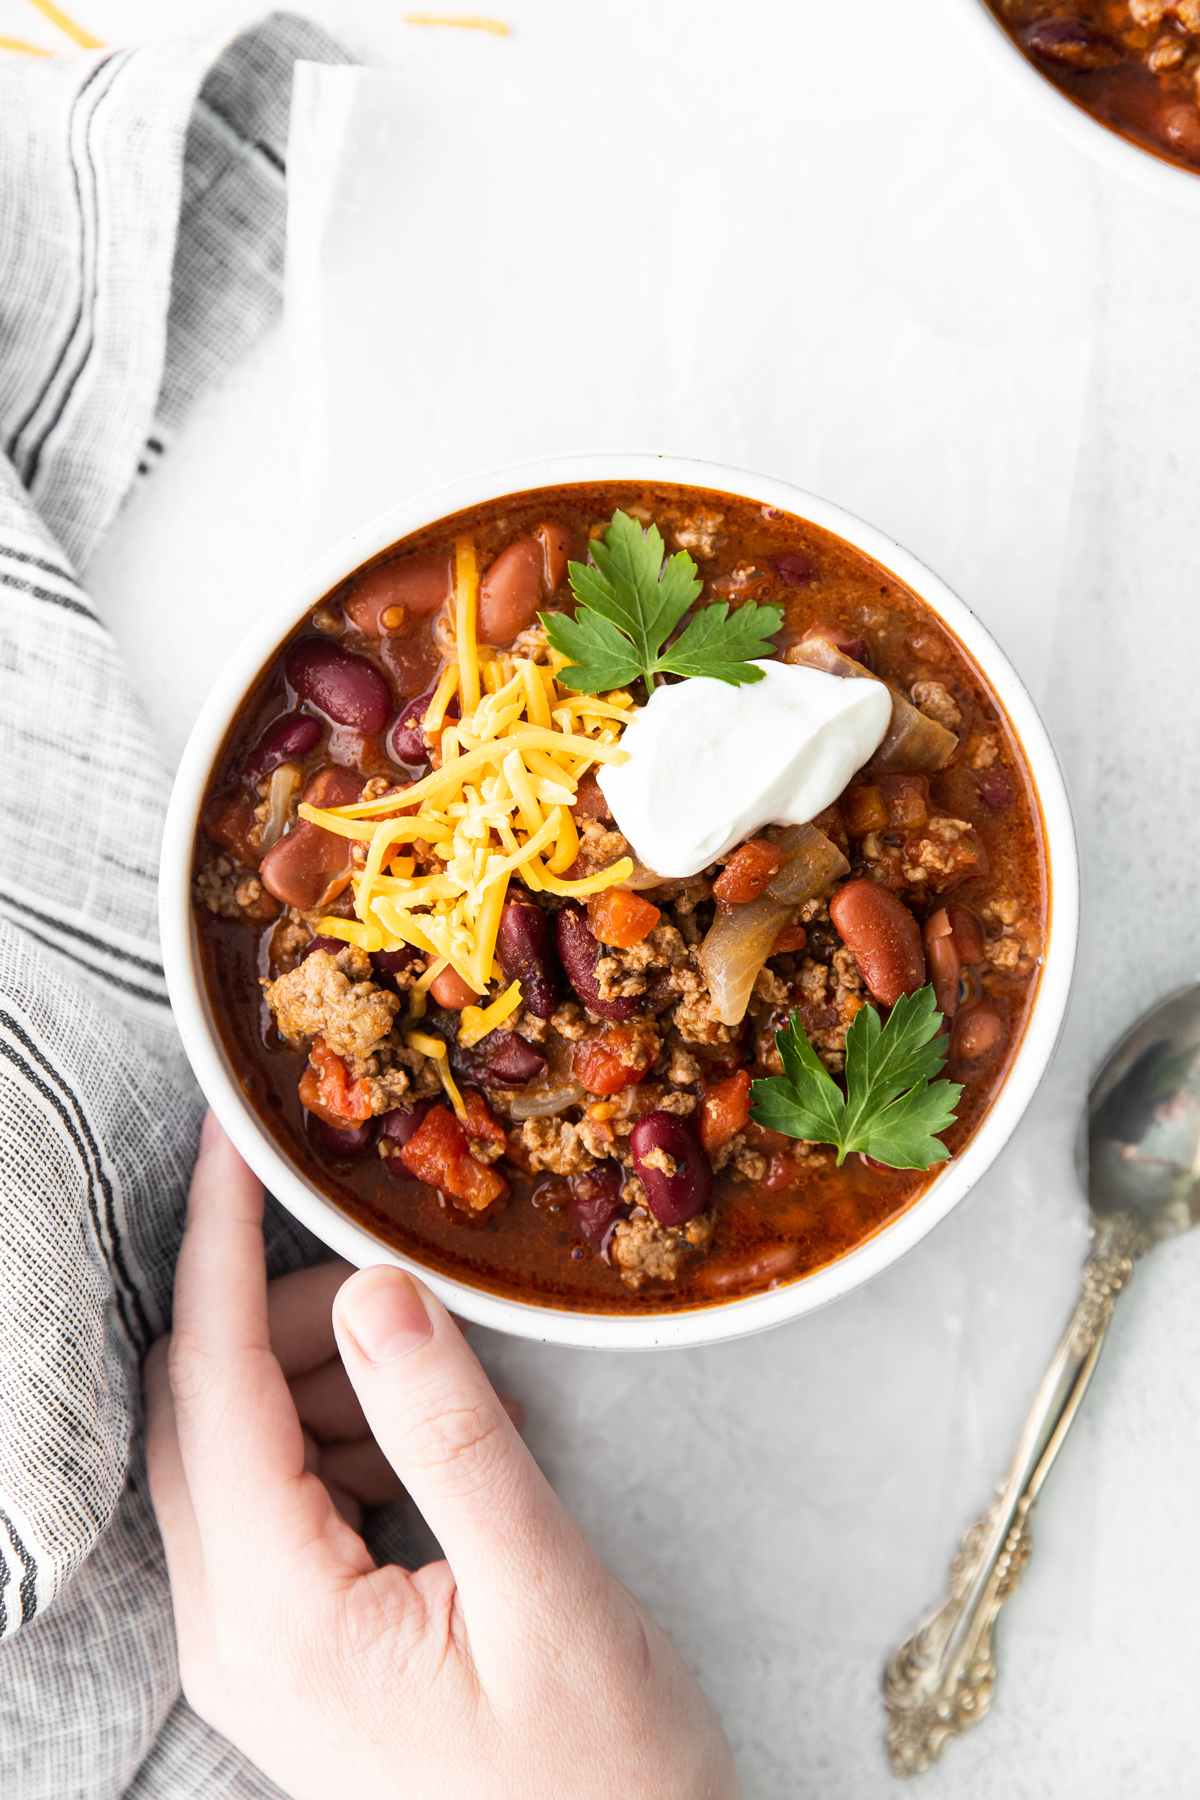 Slow cooker chili on a bowl with a hand and spoon on side.